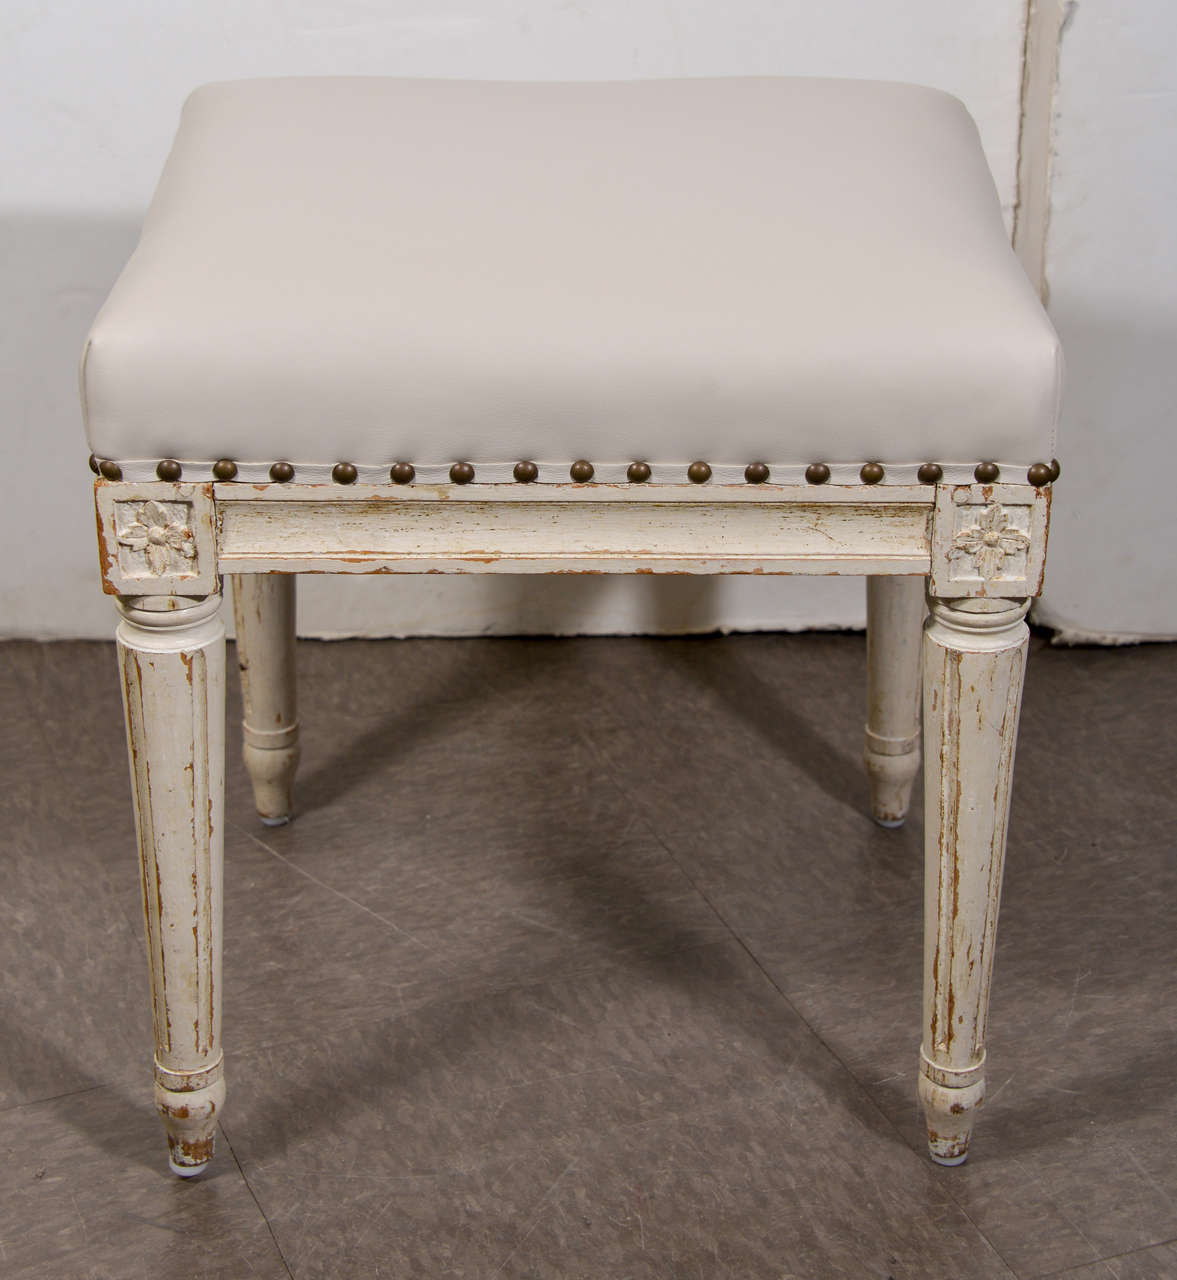 Pair of painted stools in the style of Louis XVI, circa 1860. France. Newly upholstered in smooth leather.